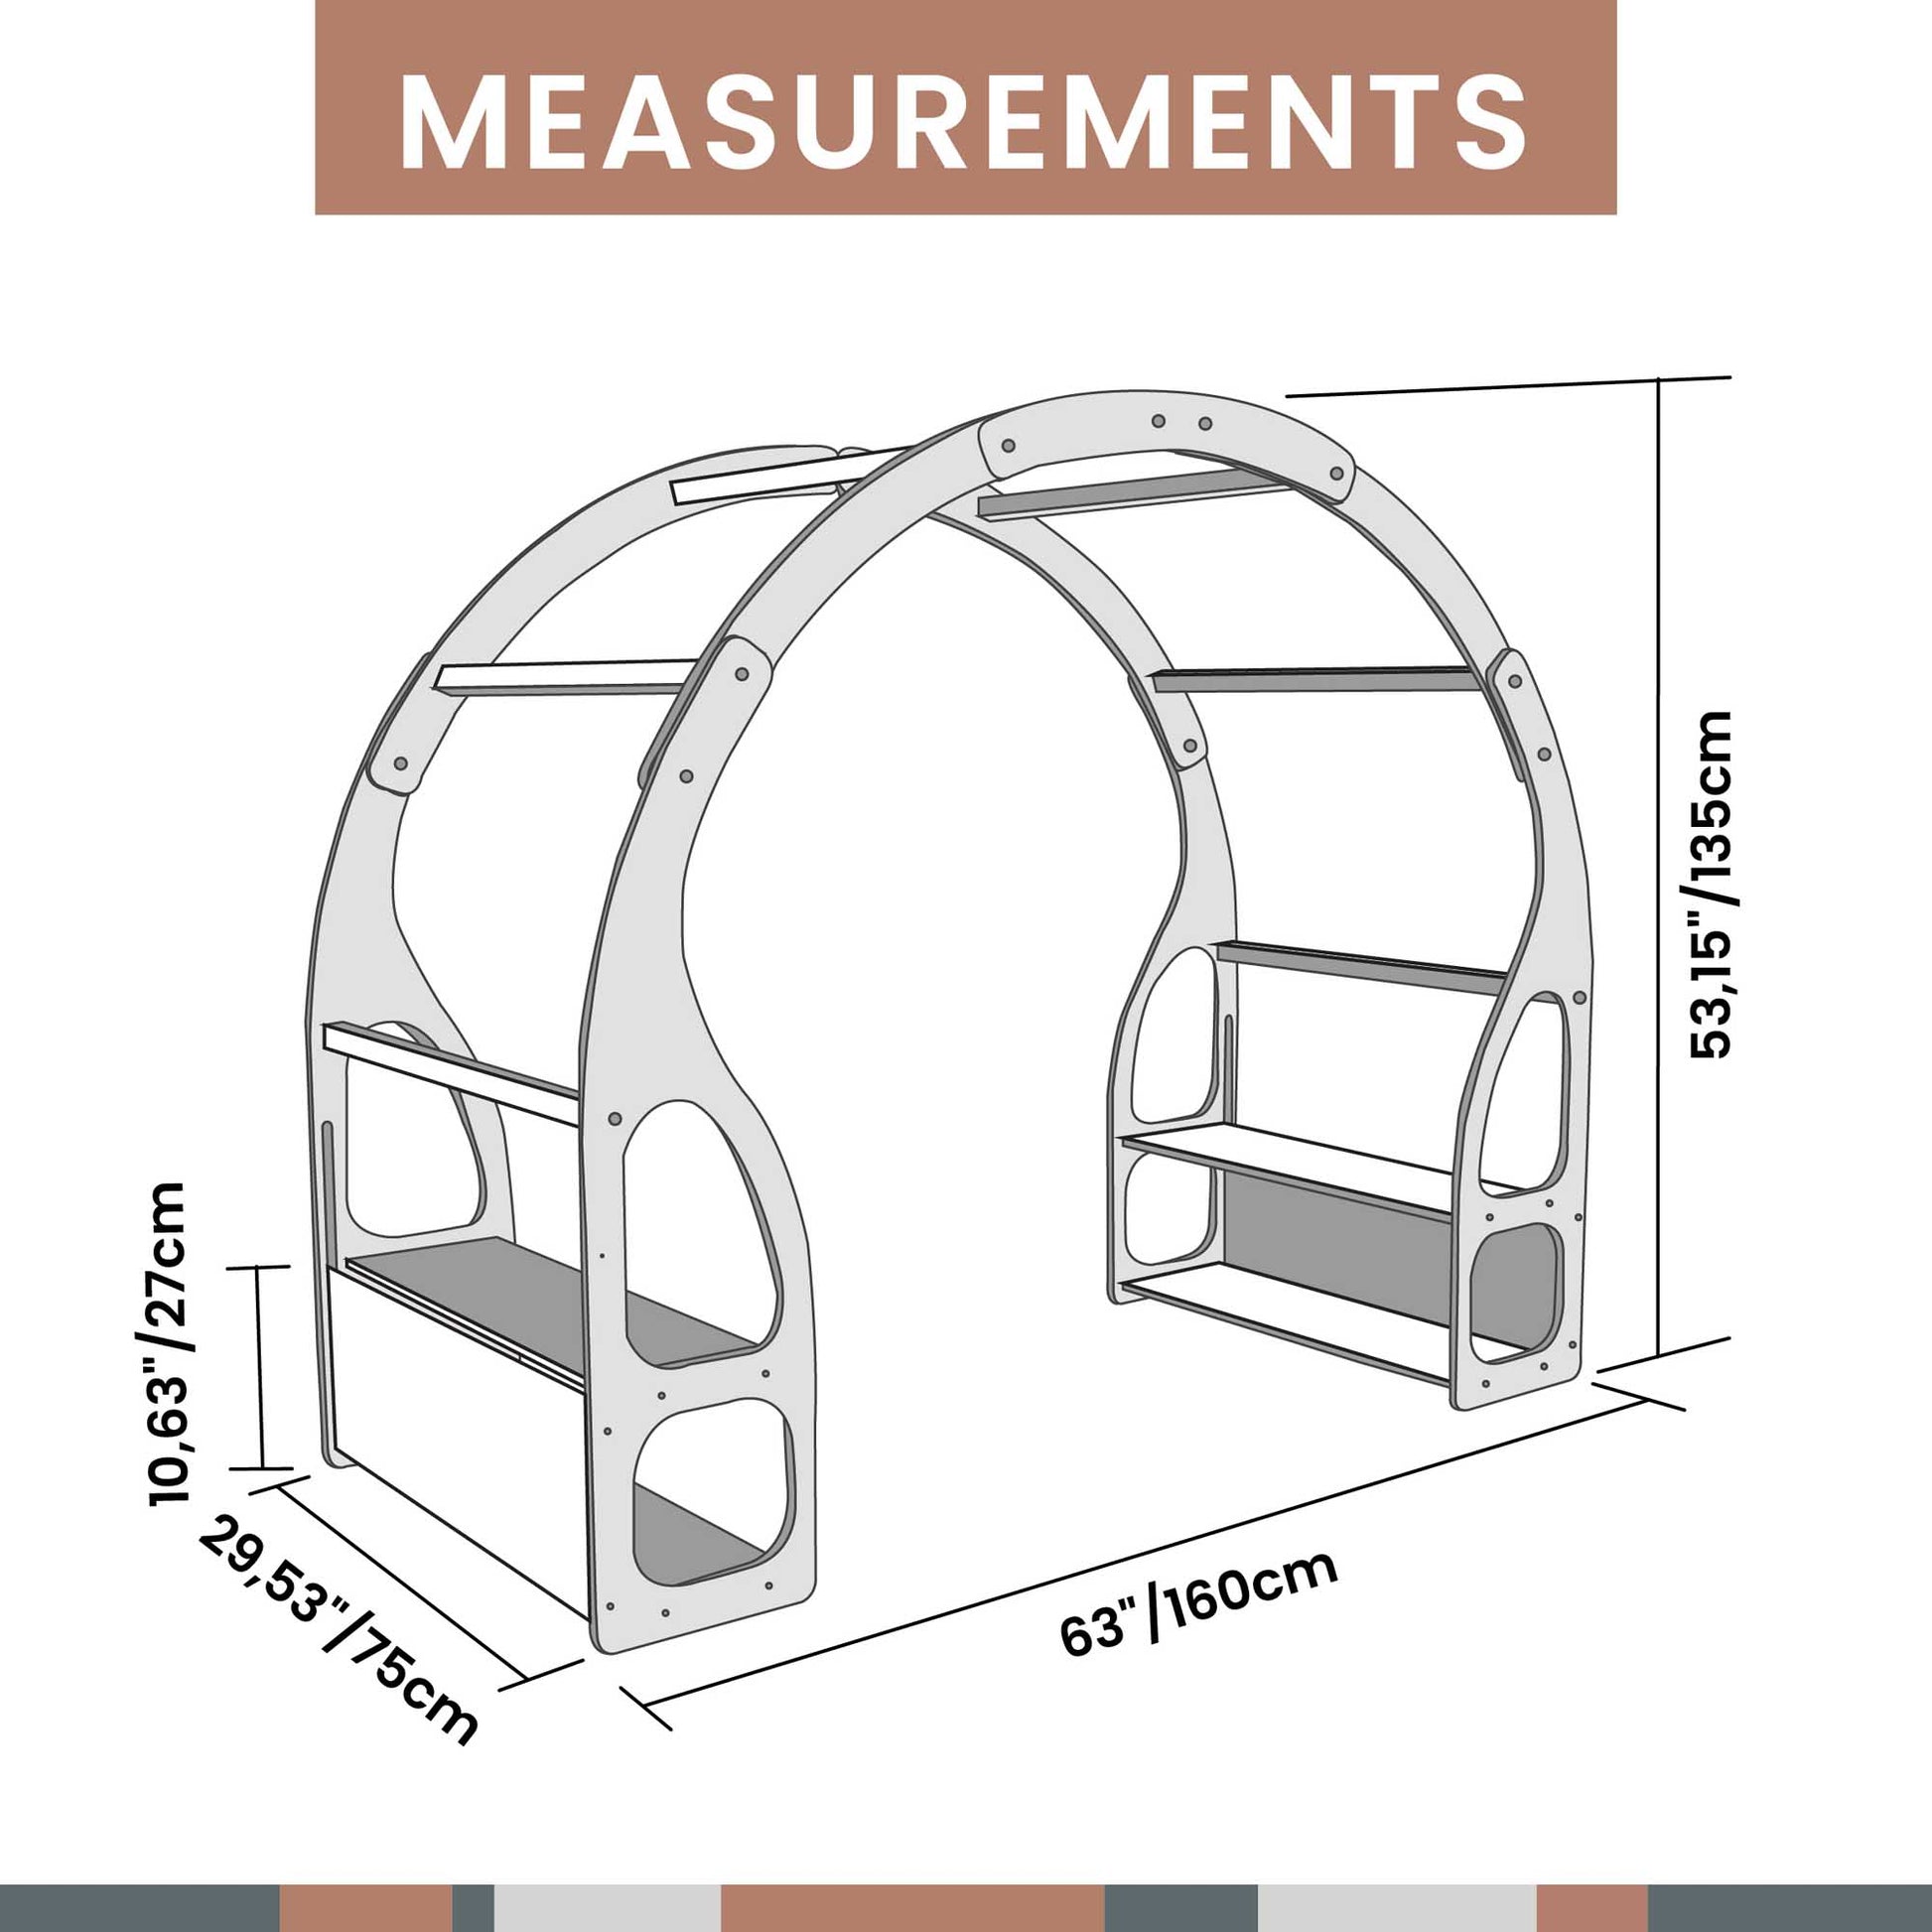 A diagram displaying the measurements of a wooden arch on a Sweet Home From Wood play stand for toddlers.